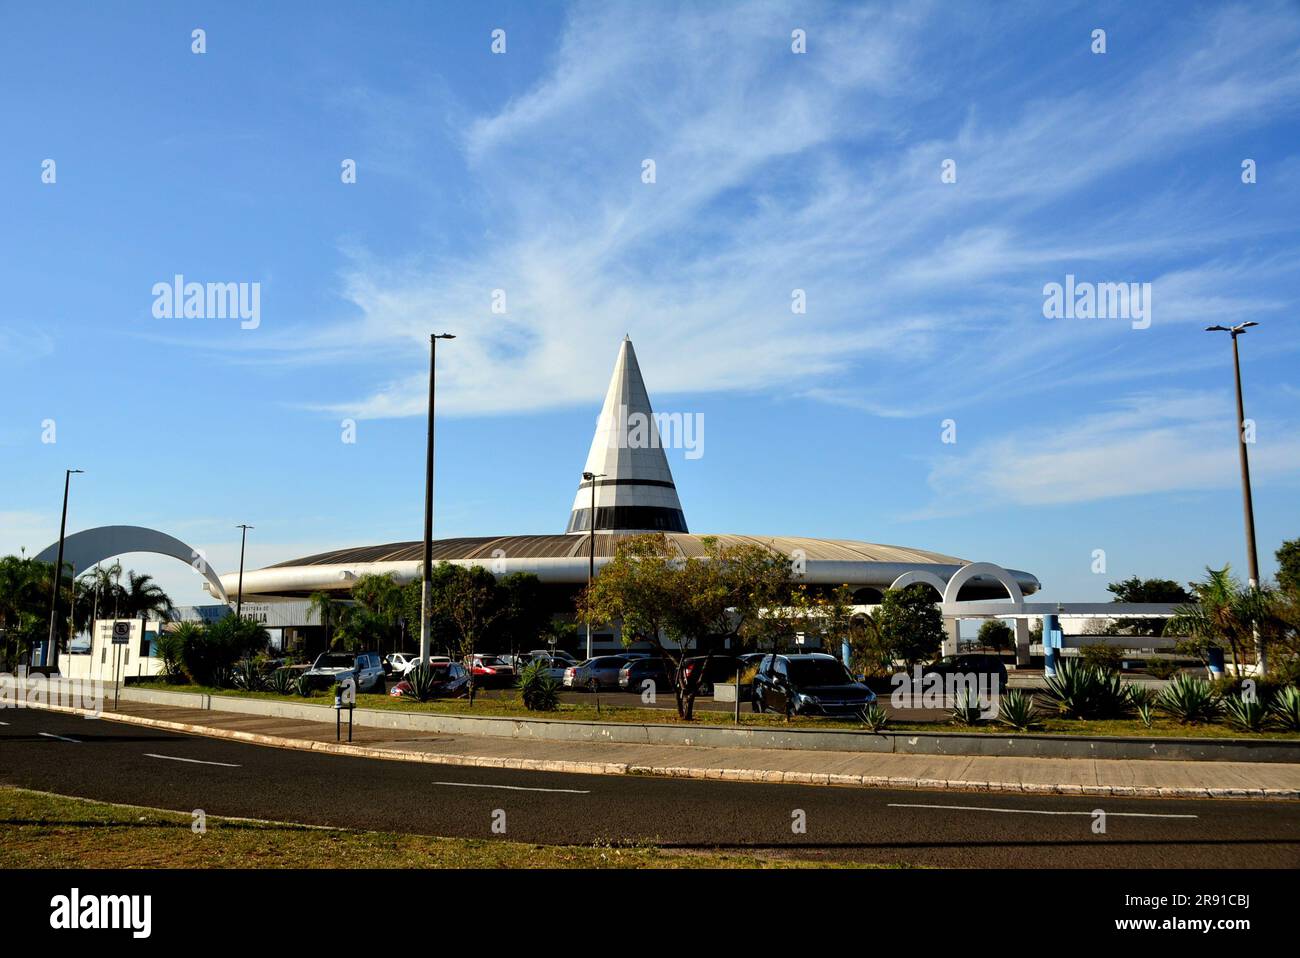 Bus station, in a city in the interior of the State of São Paulo, Brazil, South America, with pyramidal construction, parking for cars Stock Photo